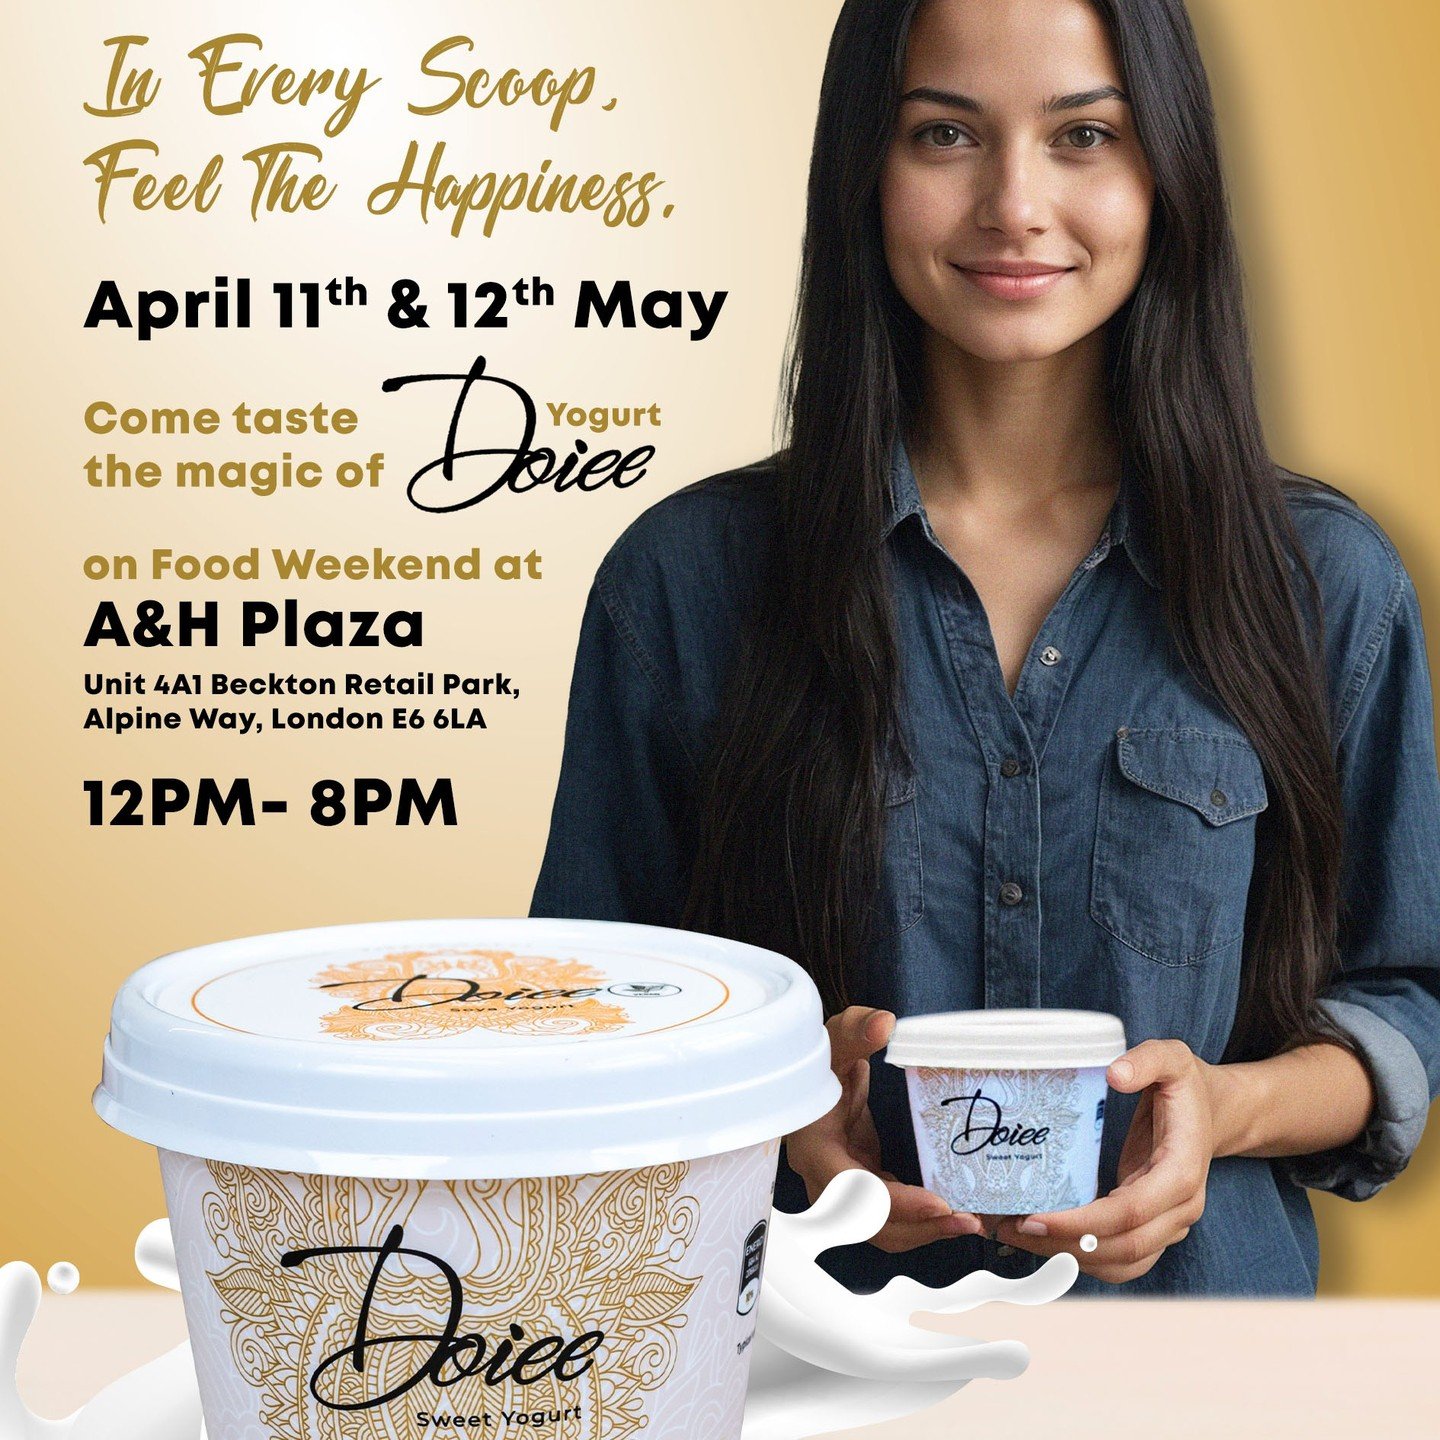 Hey there! Why not drop by A &amp; H Plaza this weekend? 

We&rsquo;ve got a treat for you&mdash;our special Doiee-Yogurt! It&rsquo;s the perfect way to add a little extra joy to your summer. Hope to see you there!
#event #foodevents